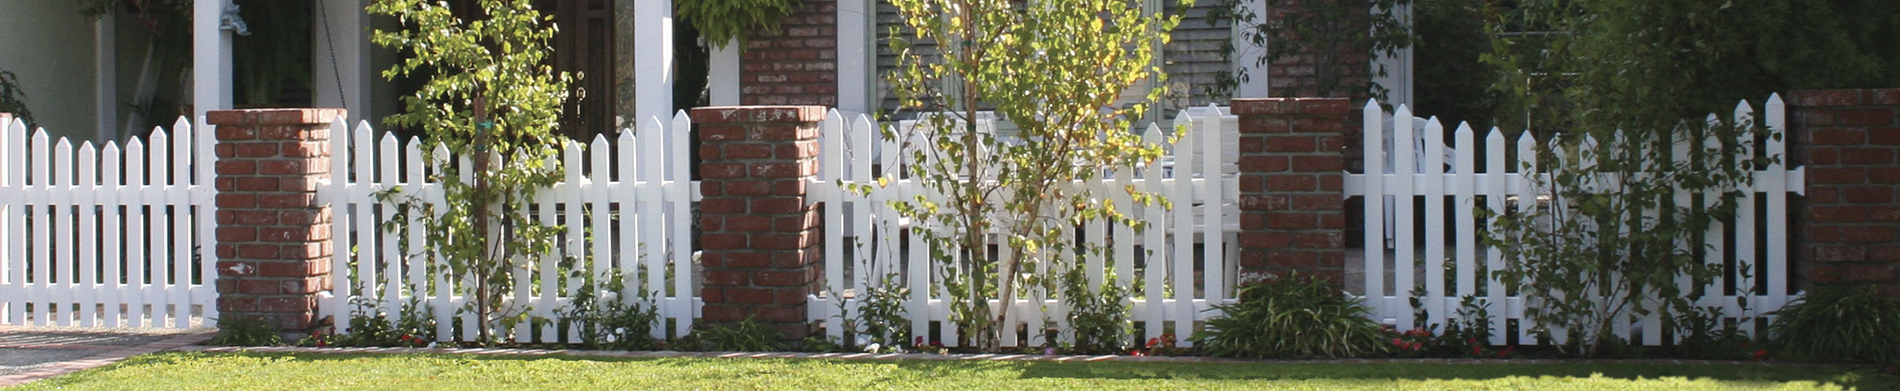 Buy traditional vinyl fencing for your ancestral property